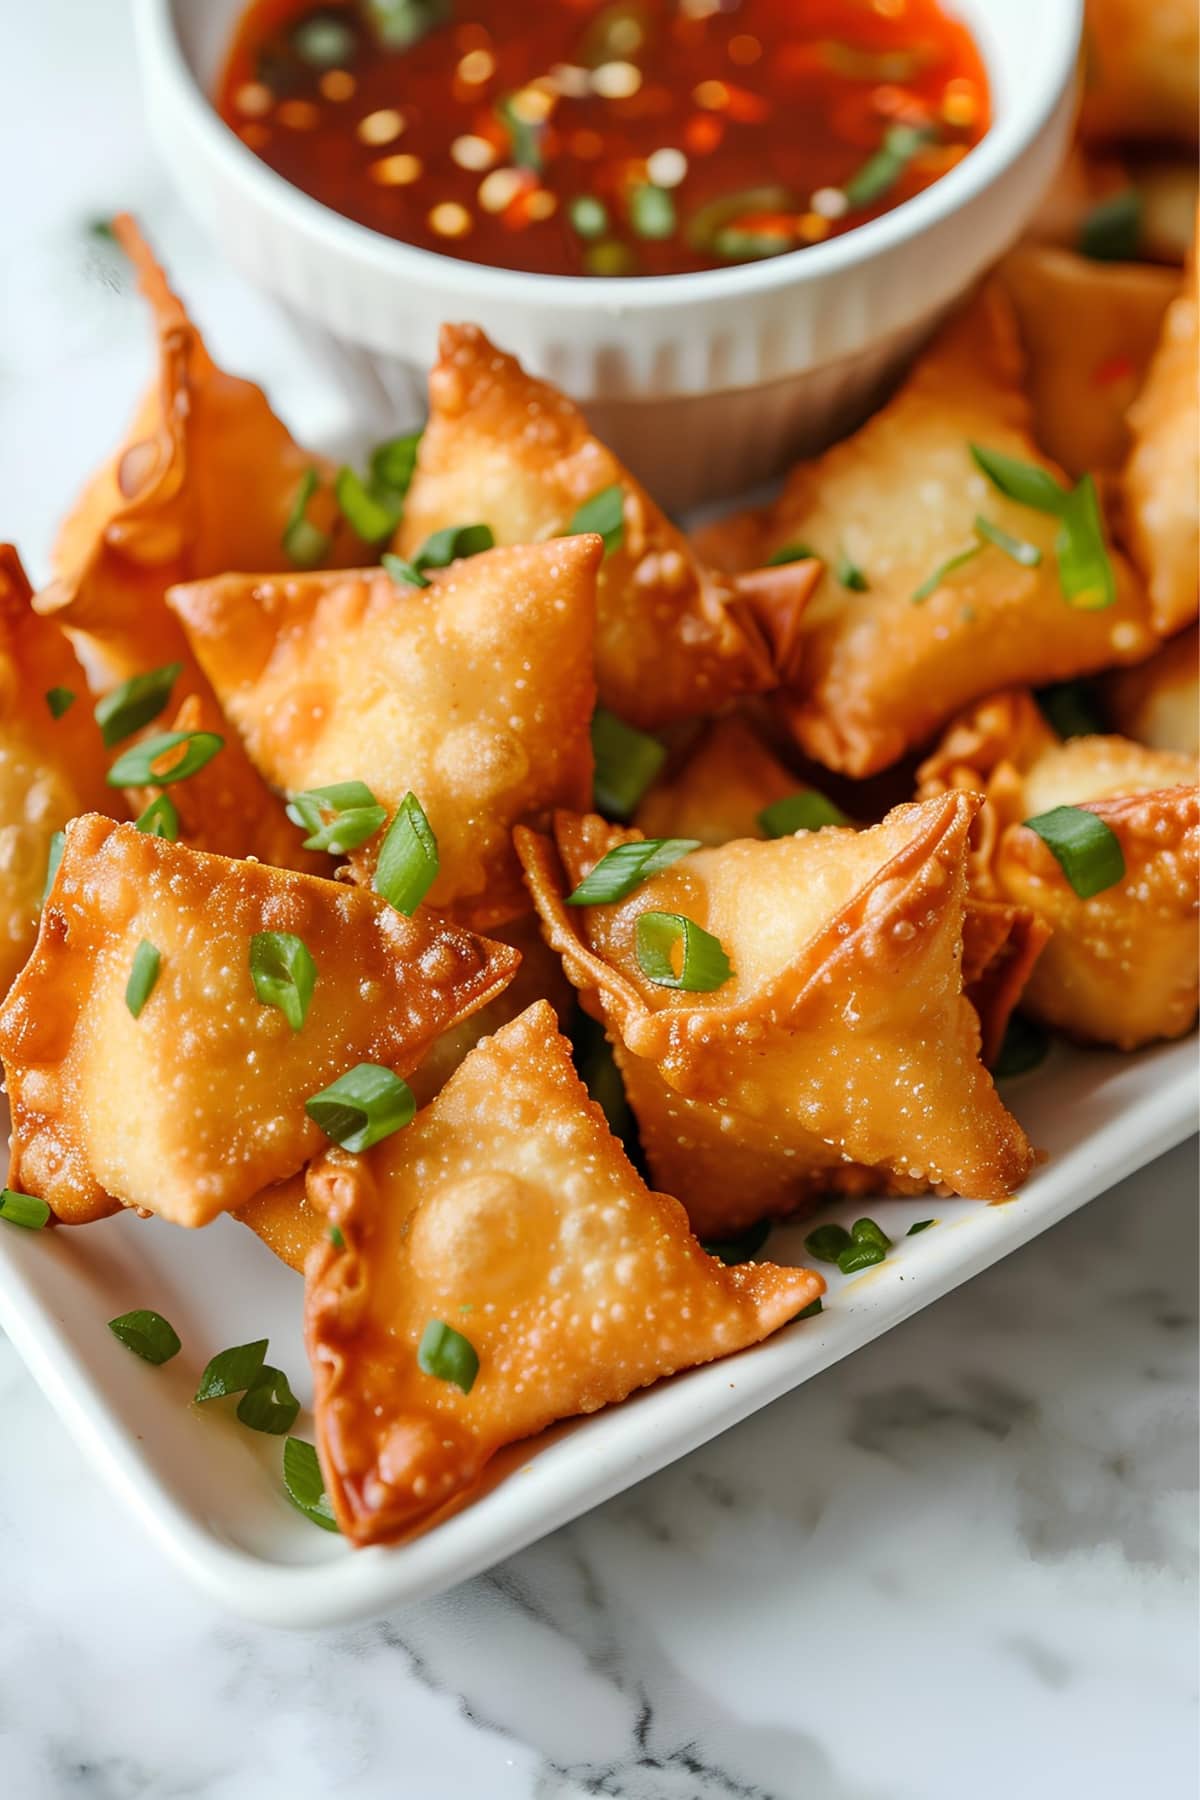 Fried crab rangoon served with sweet chili sauce